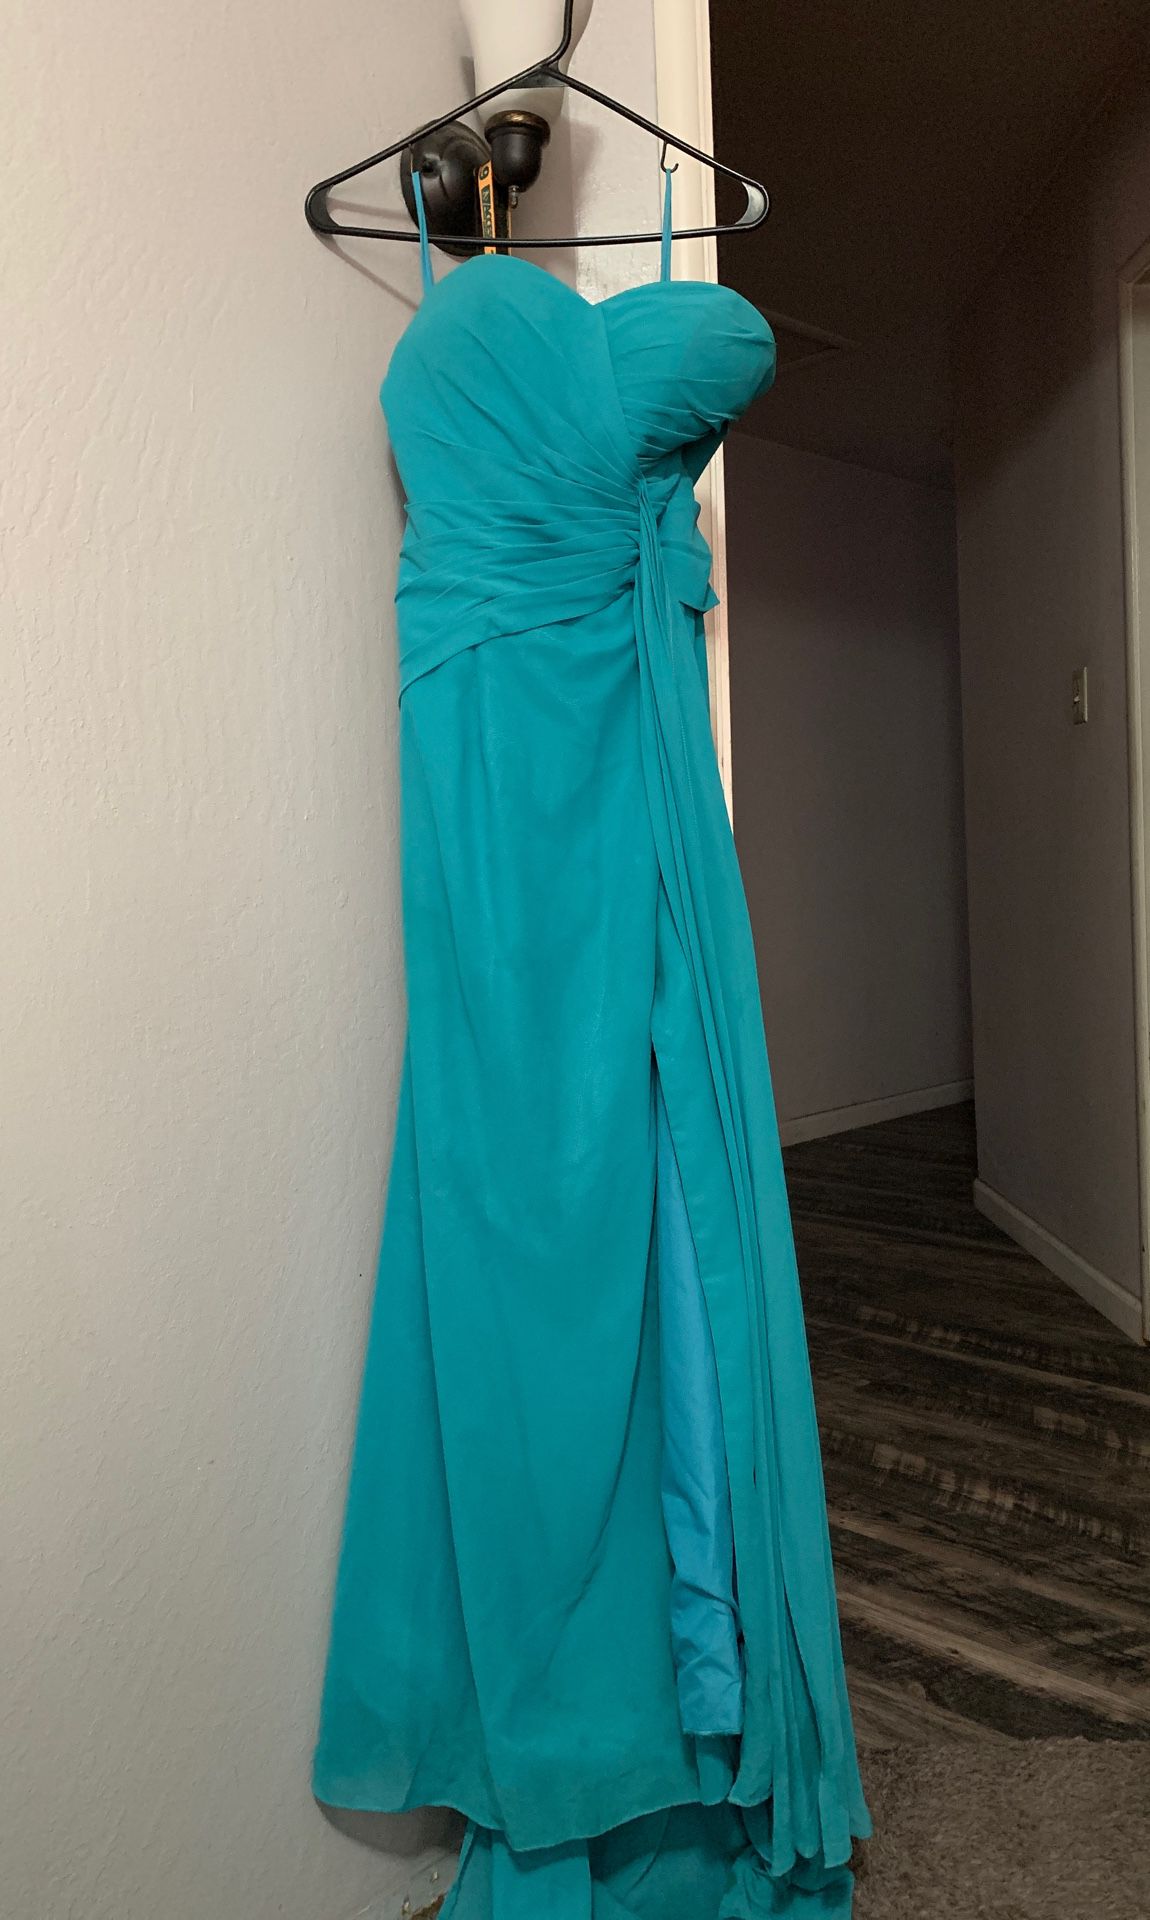 Turquoise Prom/ formal dress!